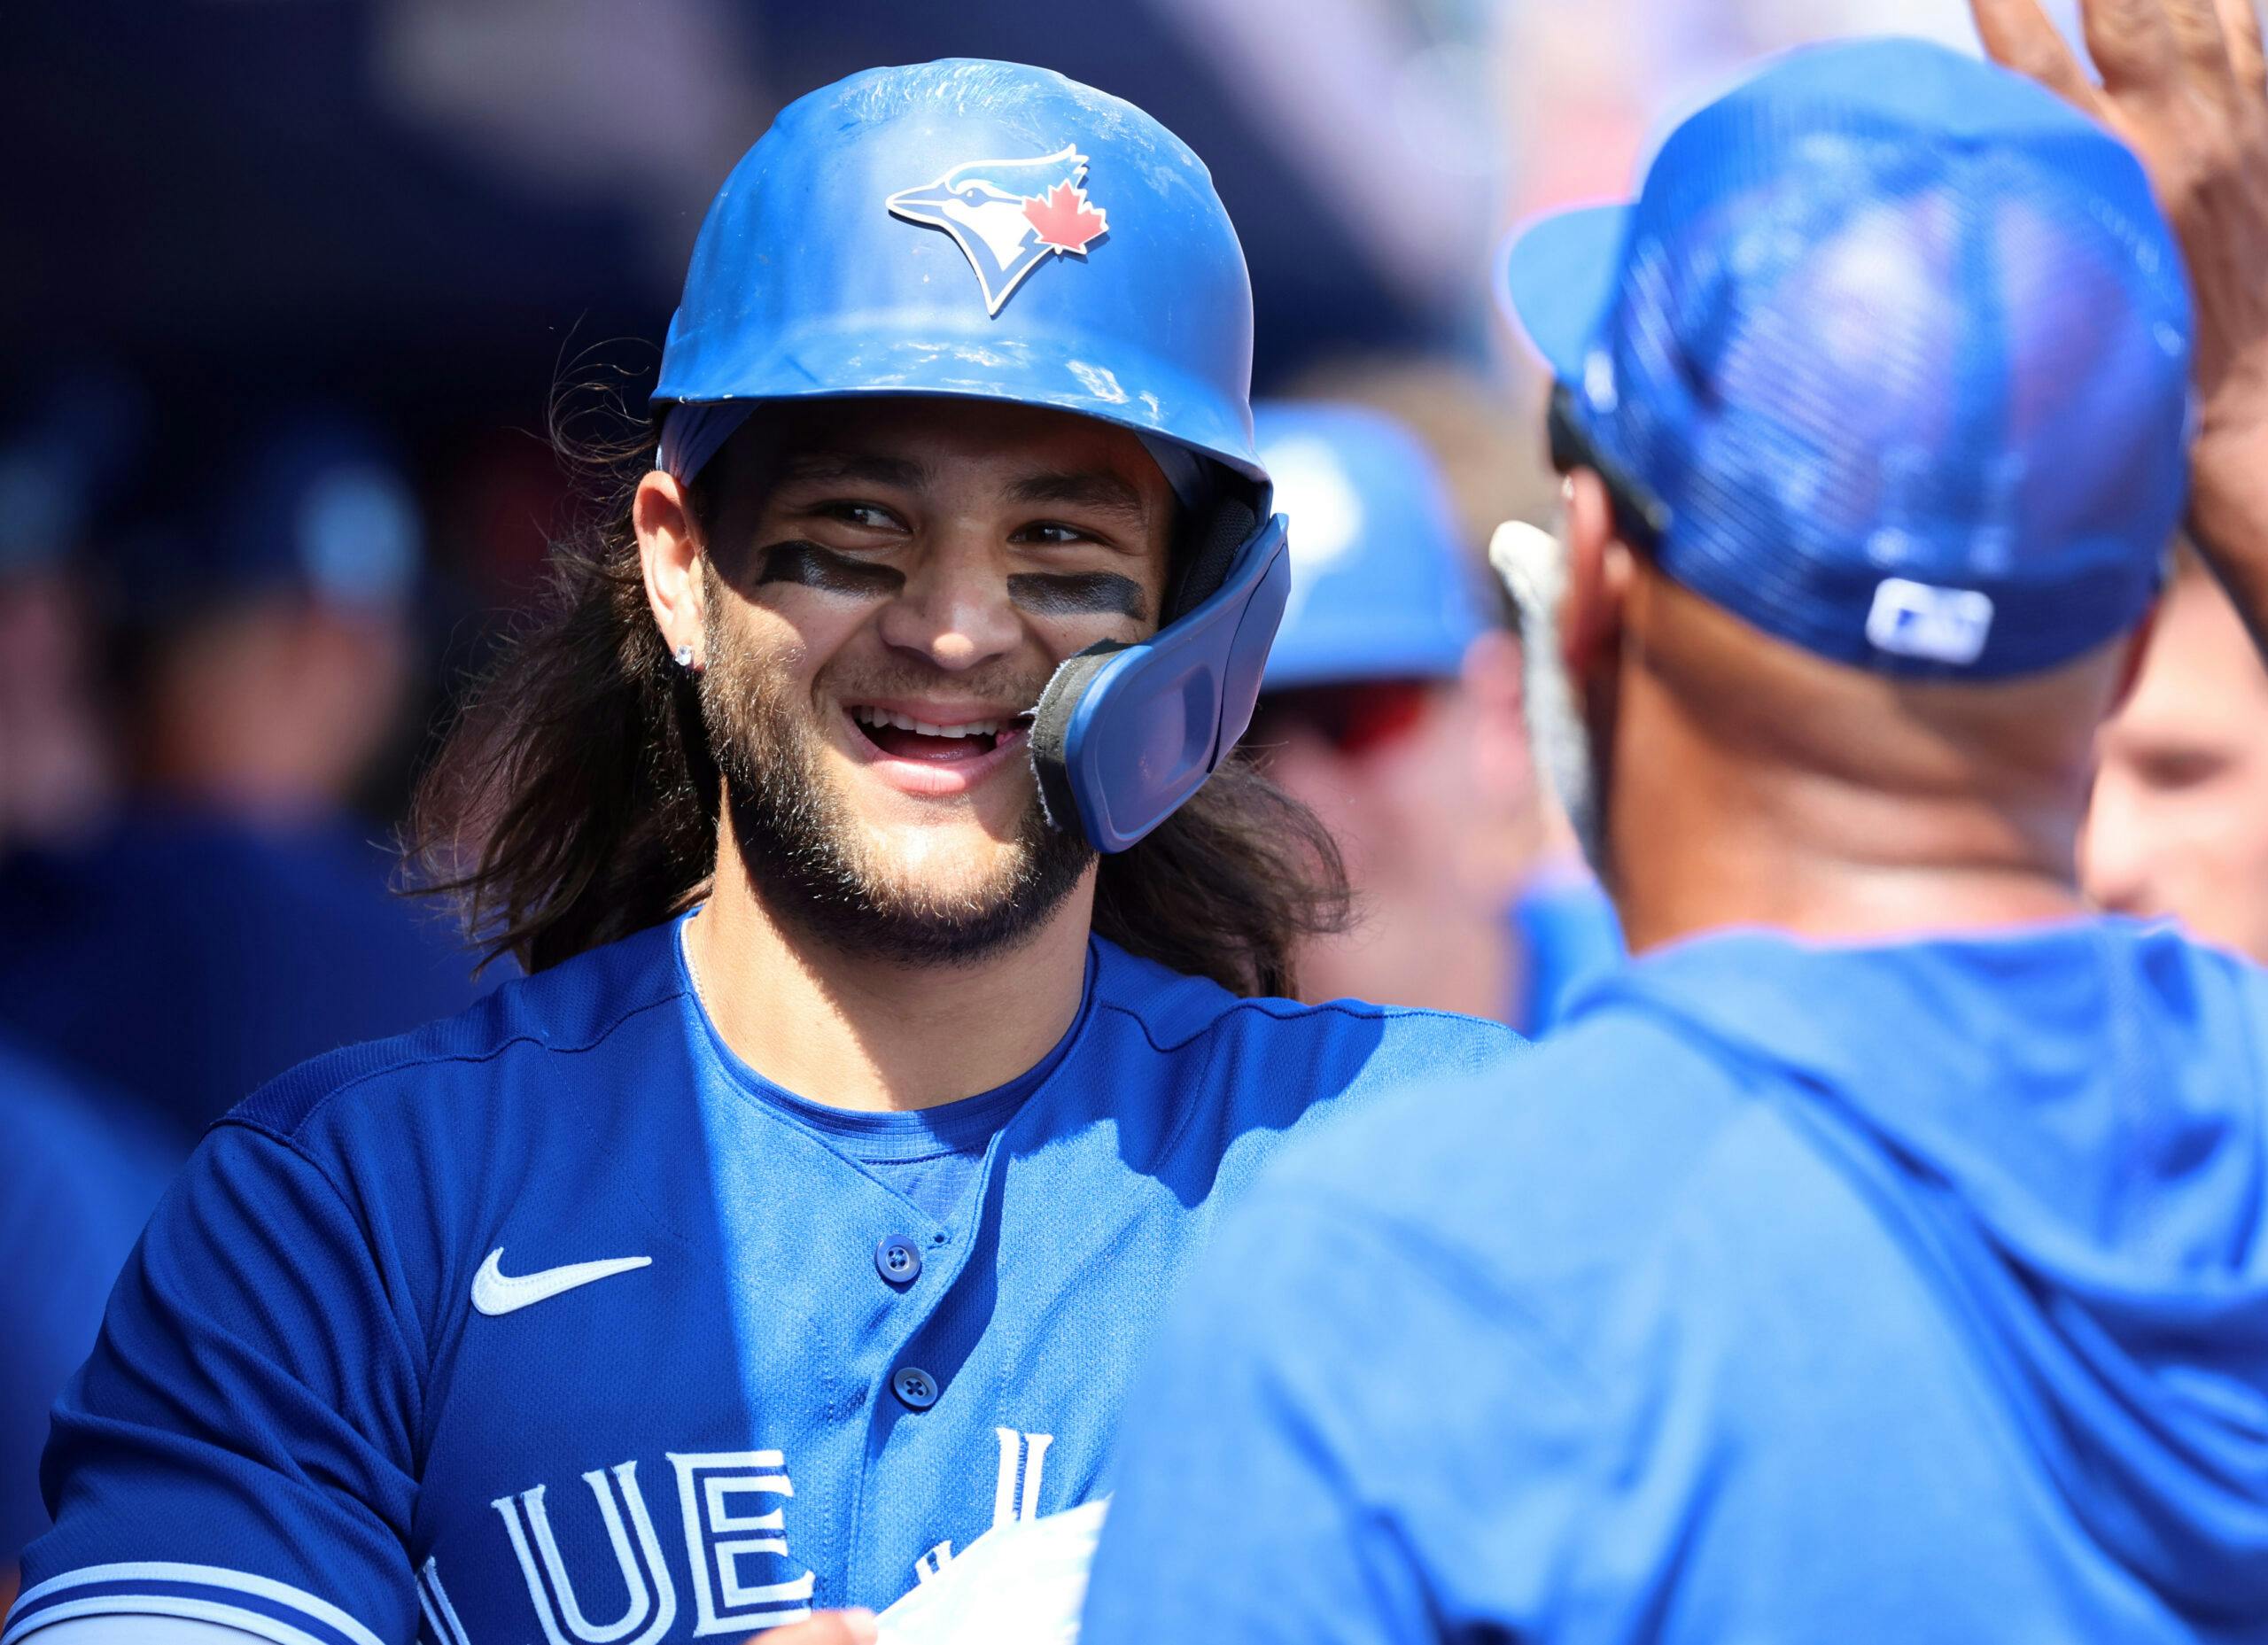 Amid red-hot spring, Bo Bichette appears ready to build off strong